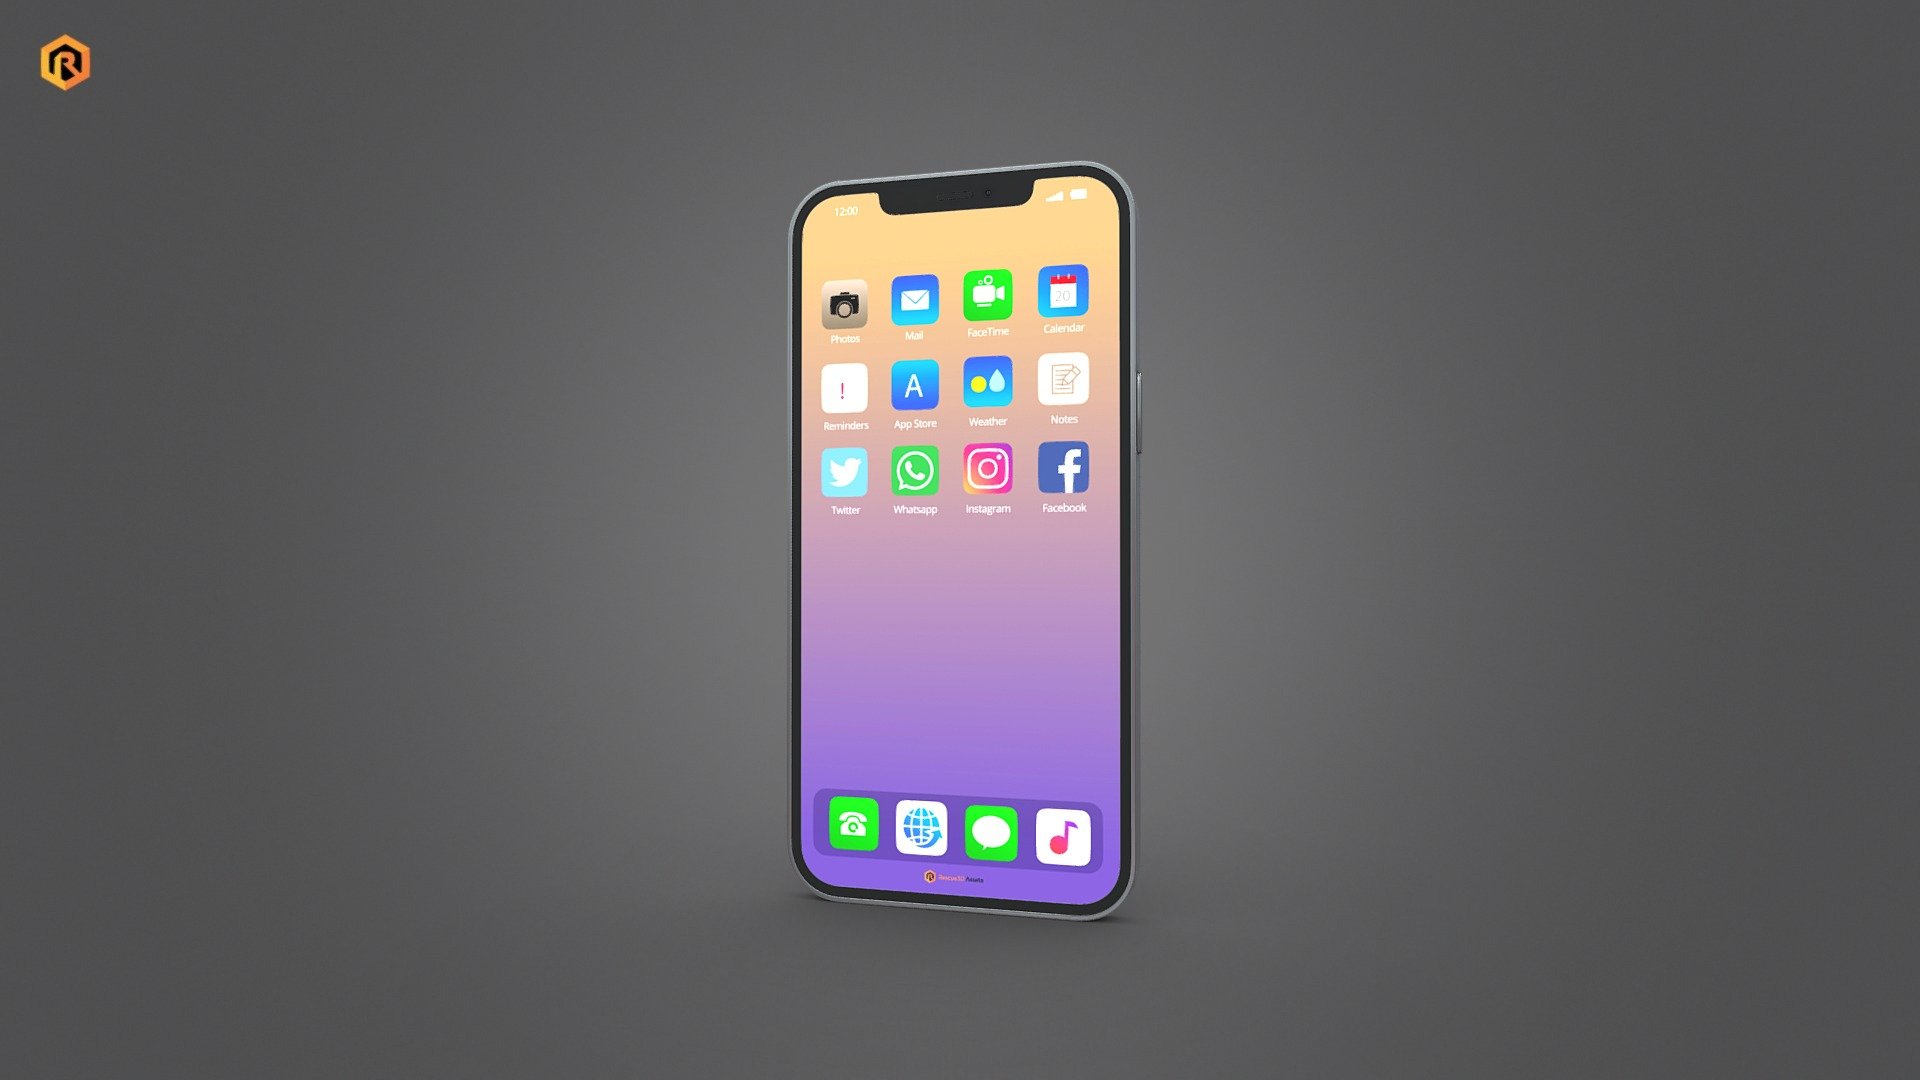 Low-poly PBR 3D model of Mobile Phone. This model is based on Apple iPhone but some small differences can be found.
This object is best for use in games and other VR/AR, real-time applications such as Unity or Unreal Engine.
It can also be rendered in Blender (ex Cycles) or Vray as the model is equipped with all required PBR textures.

Technical details:




3 PBR textures sets (Main Body, Emission and Alpha) 

4994 Triangles

4720  Vertices

Model is one mesh

Lot of additional file formats included (Blender, Unity, Unreal 4, Maya etc.)   

PBR texture sets details:




4096 Main Body texture set (Albedo, Metallic/Roughness, Normal, AO)

2048 Emission texture set (Albedo, Metallic/Roughness, Normal, AO)

2048 Alpha texture set (Albedo, Metallic/Roughness, Normal)

More file formats are available in additional zip file on product page.

Please feel free to contact me if you have any questions or need any support for this asset.

Support e-mail: support@rescue3d.com - Apple iPhone based mobile phone - Download Free 3D model by Rescue3D Assets (@rescue3d) 3d model